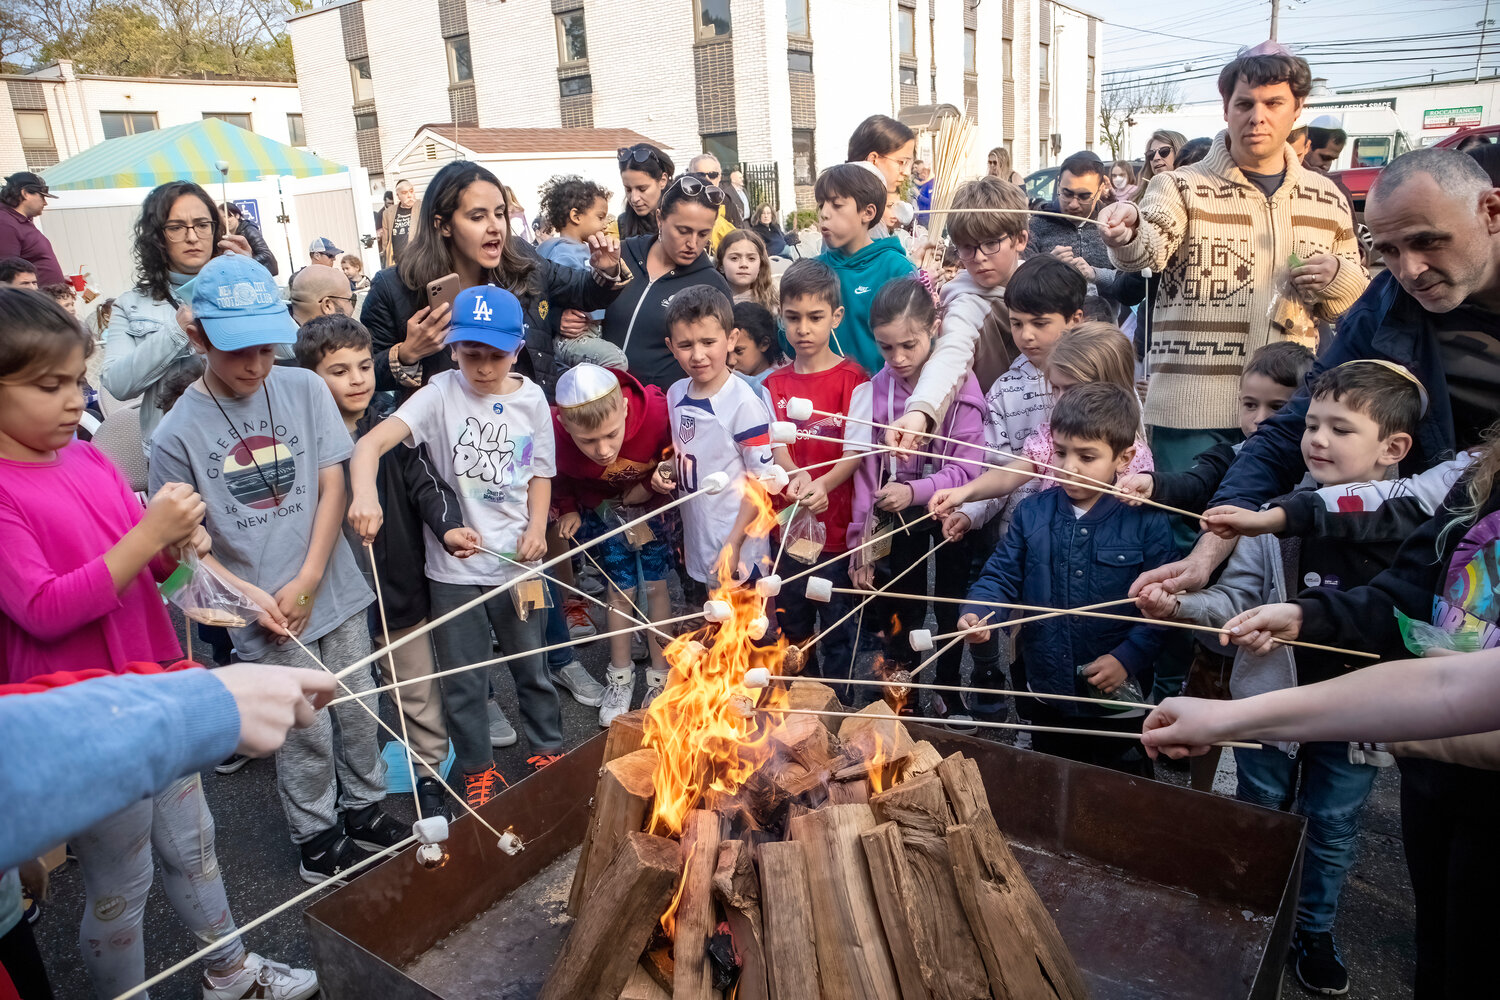 The Chabad Center for Jewish Life hosted its annual Lag B’Omer festivities at its Merrick center on May 9. The holiday is celebrated through many fun activities, including a bonfire.